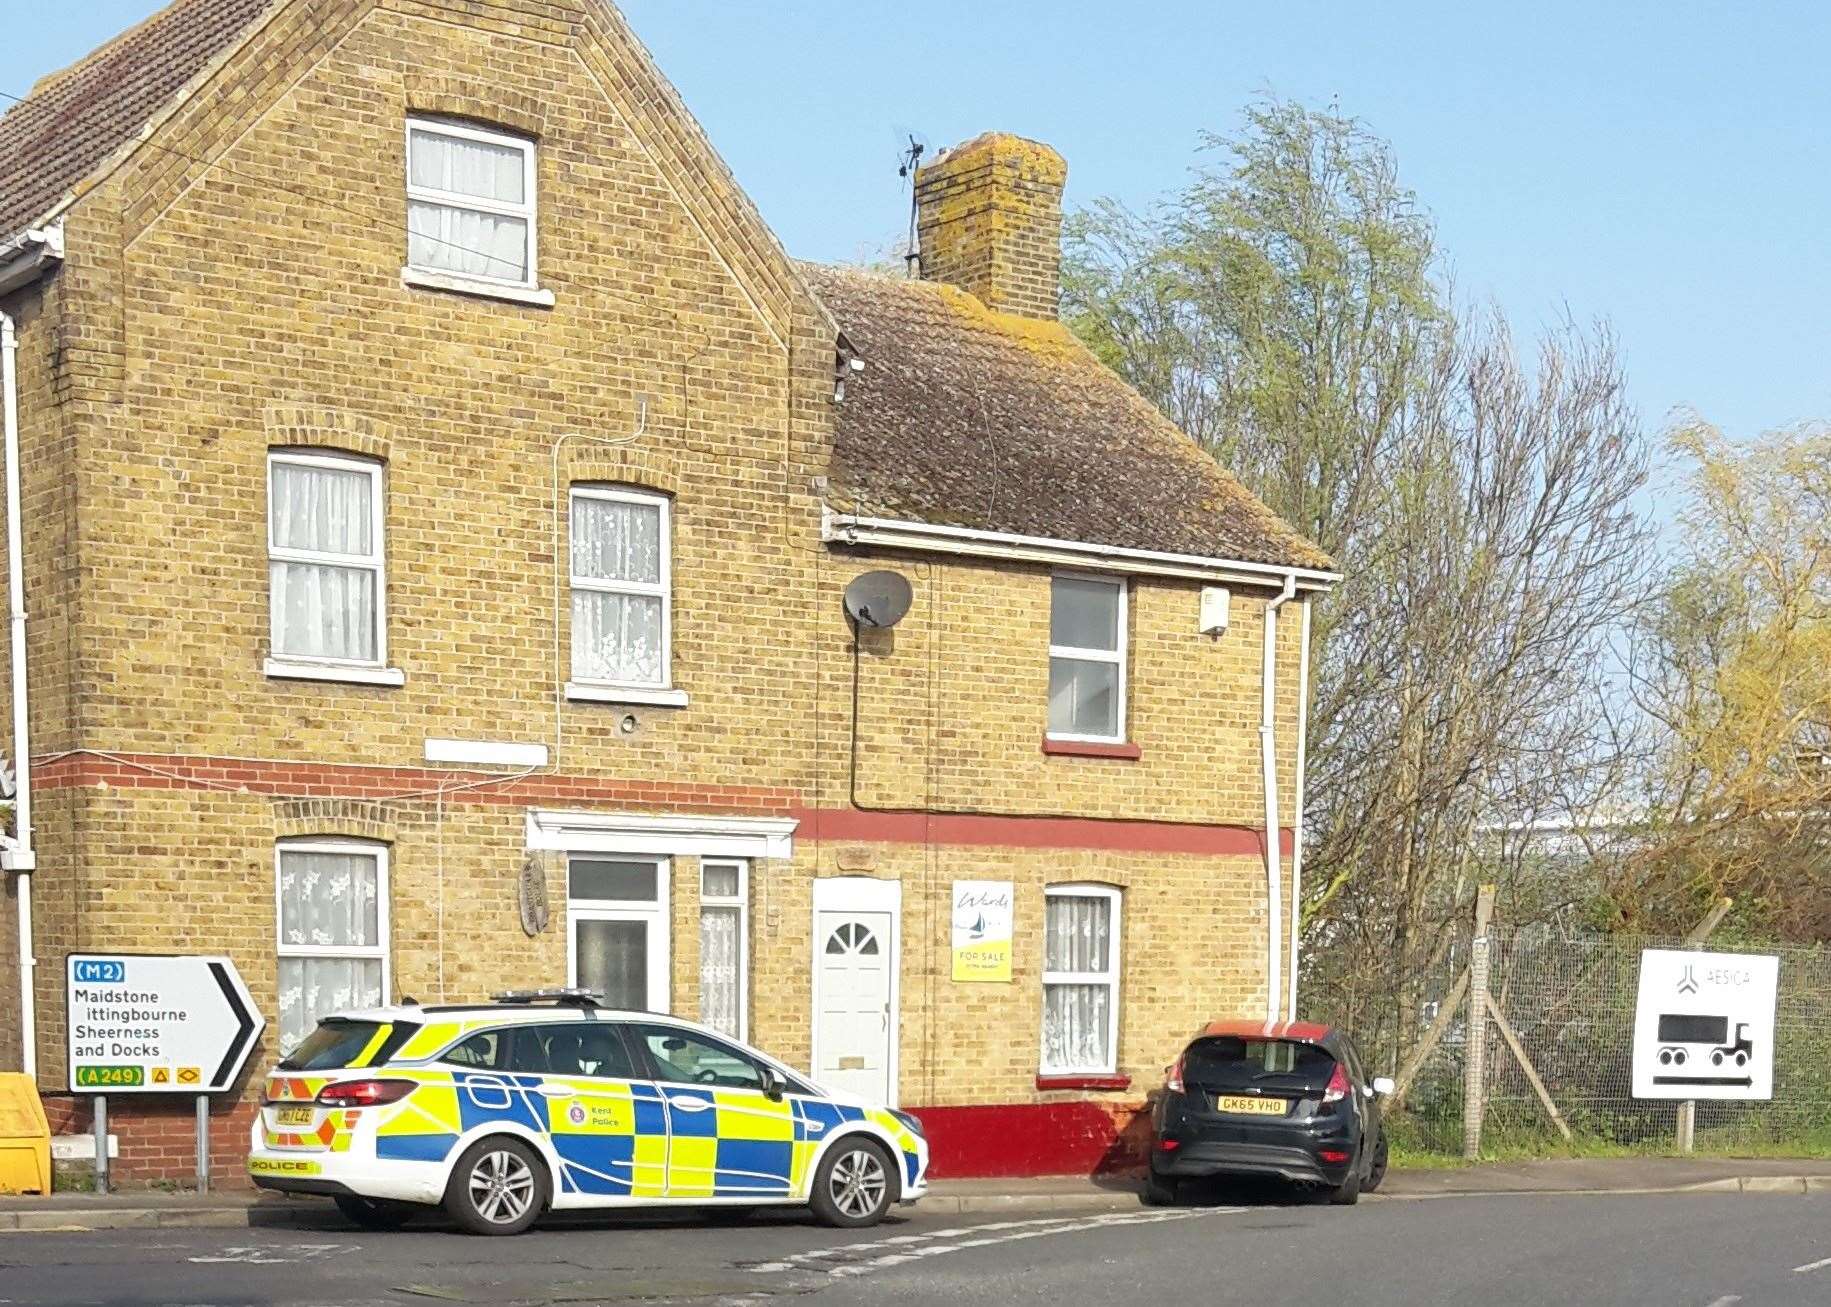 A car has crashed into a house in Queenborough (8411050)